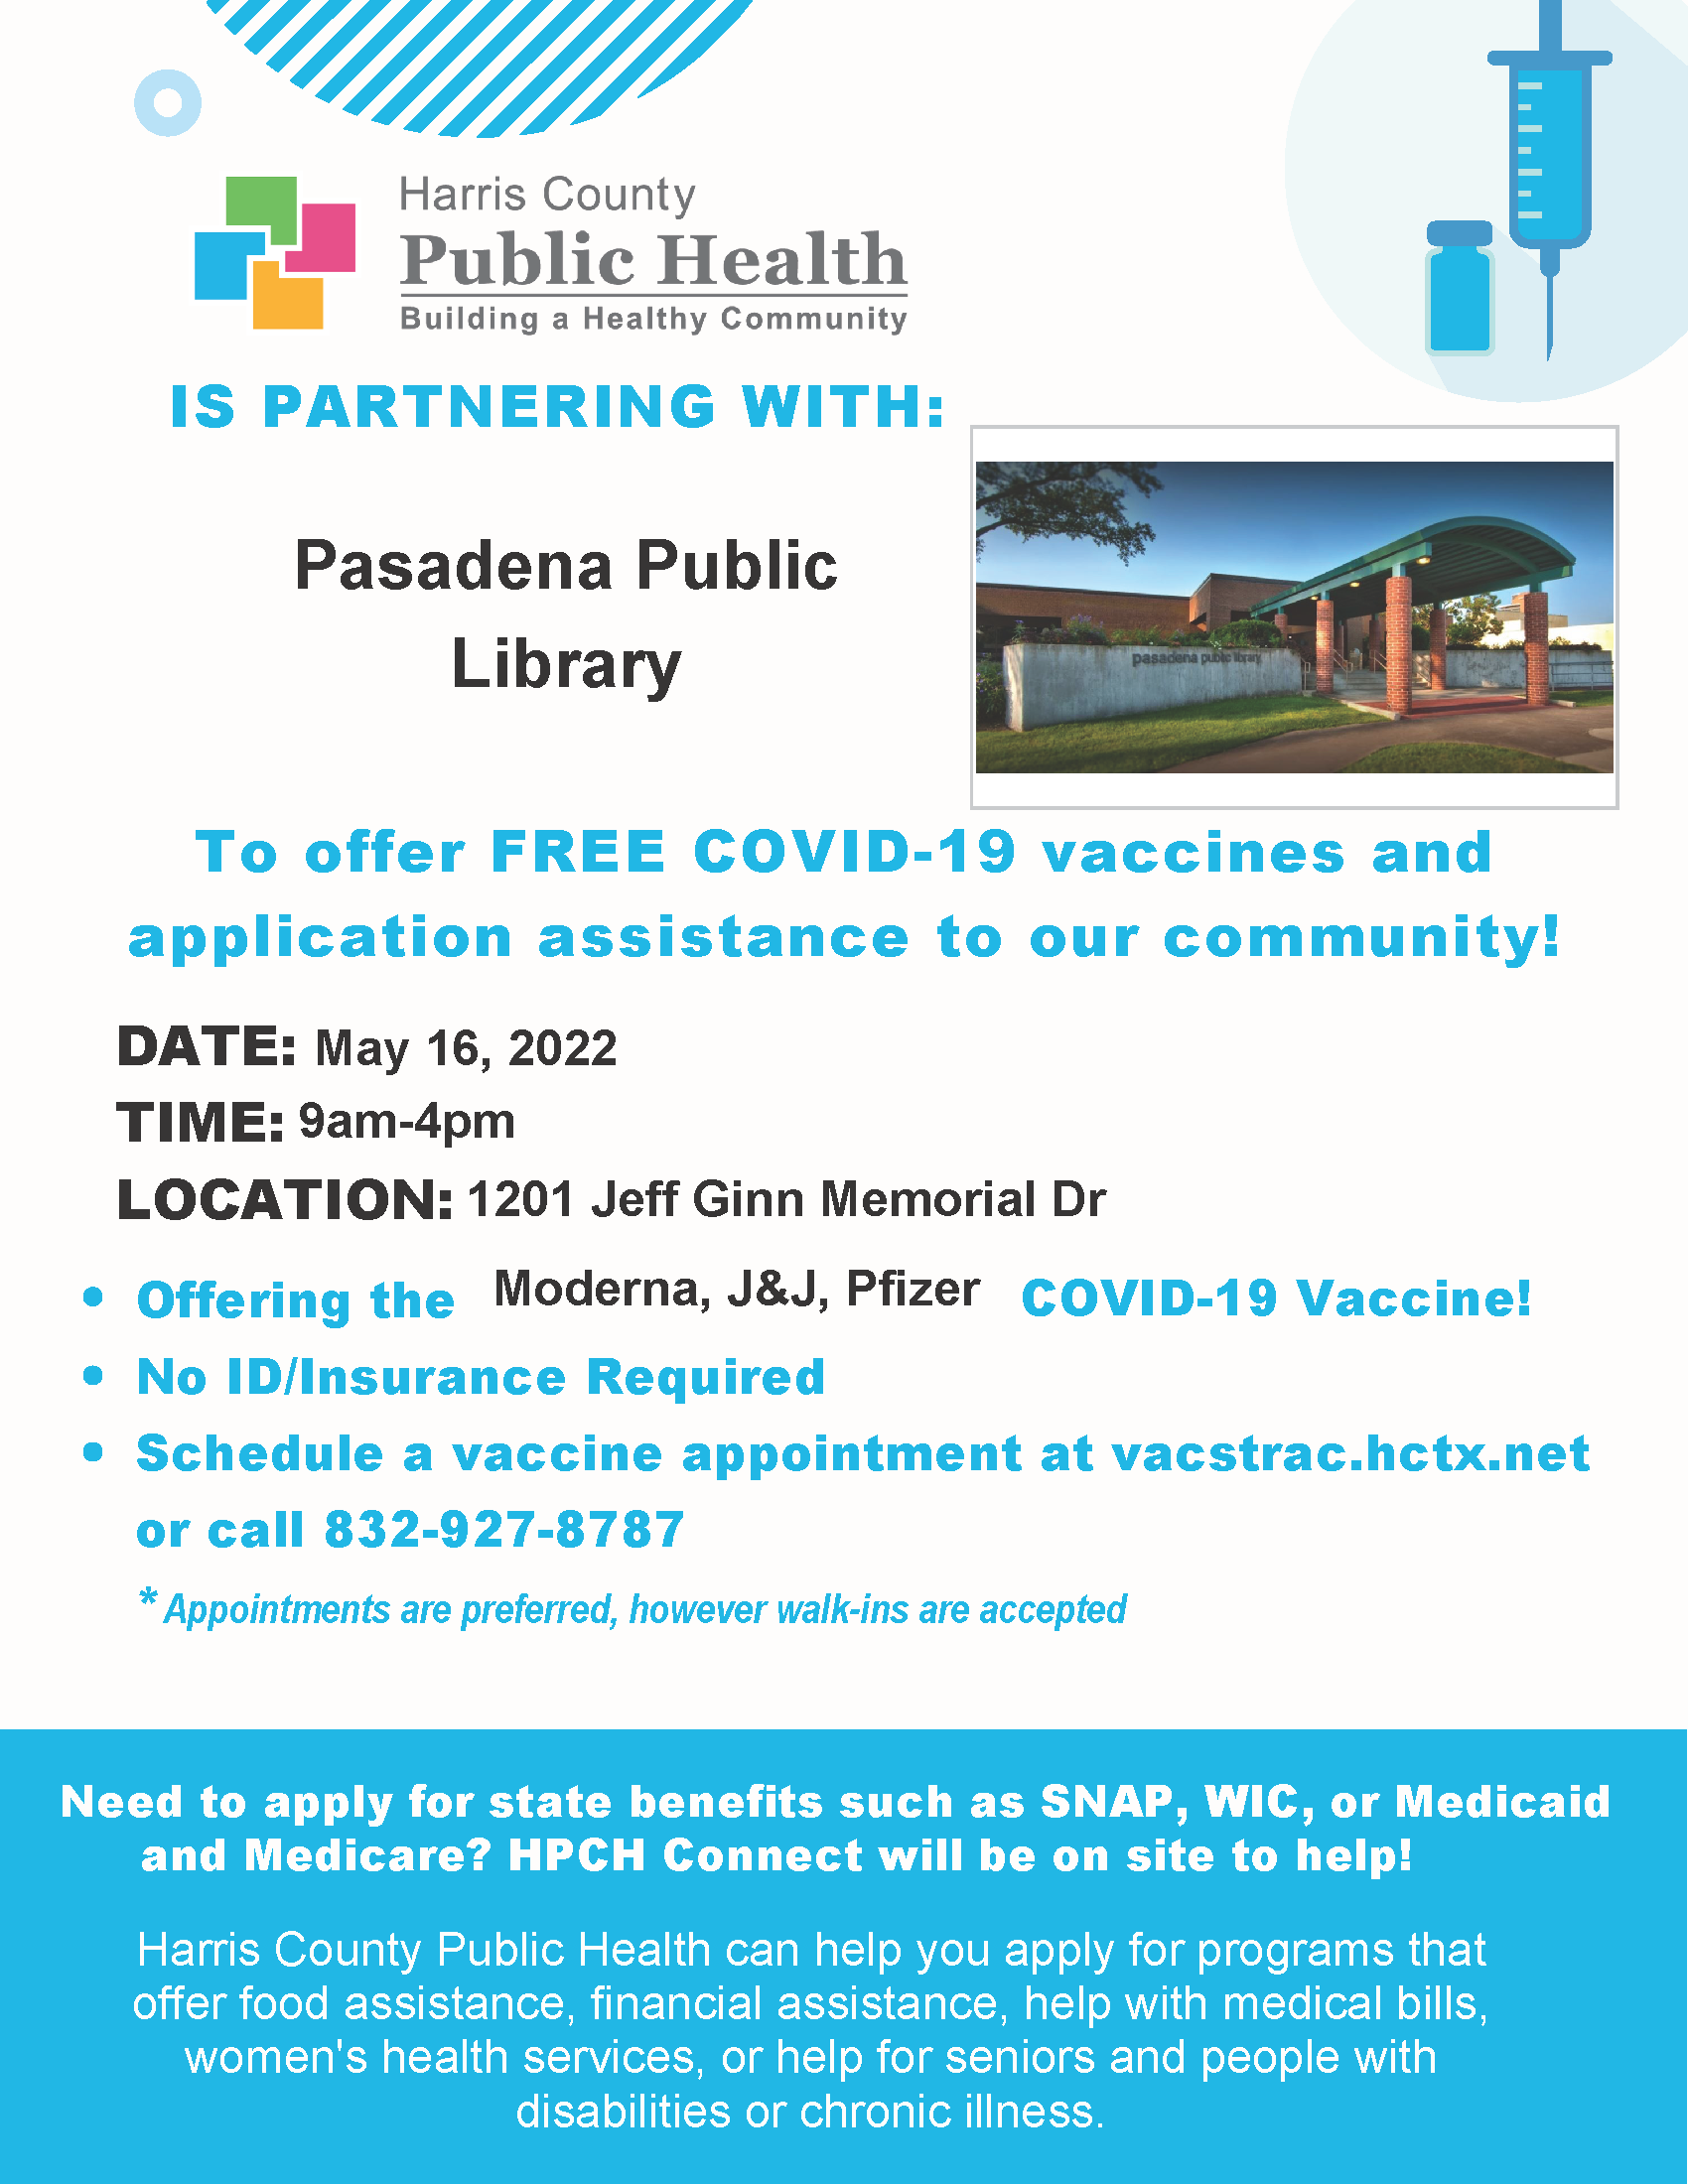 FREE COVID-19 vaccines and application assistance to our community! DATE: TIME: LOCATION: Offering the COVID-19 Vaccine!No ID/Insurance Required Schedule a vaccine appointment at vacstrac.hctx.net or call 832-927-8787.